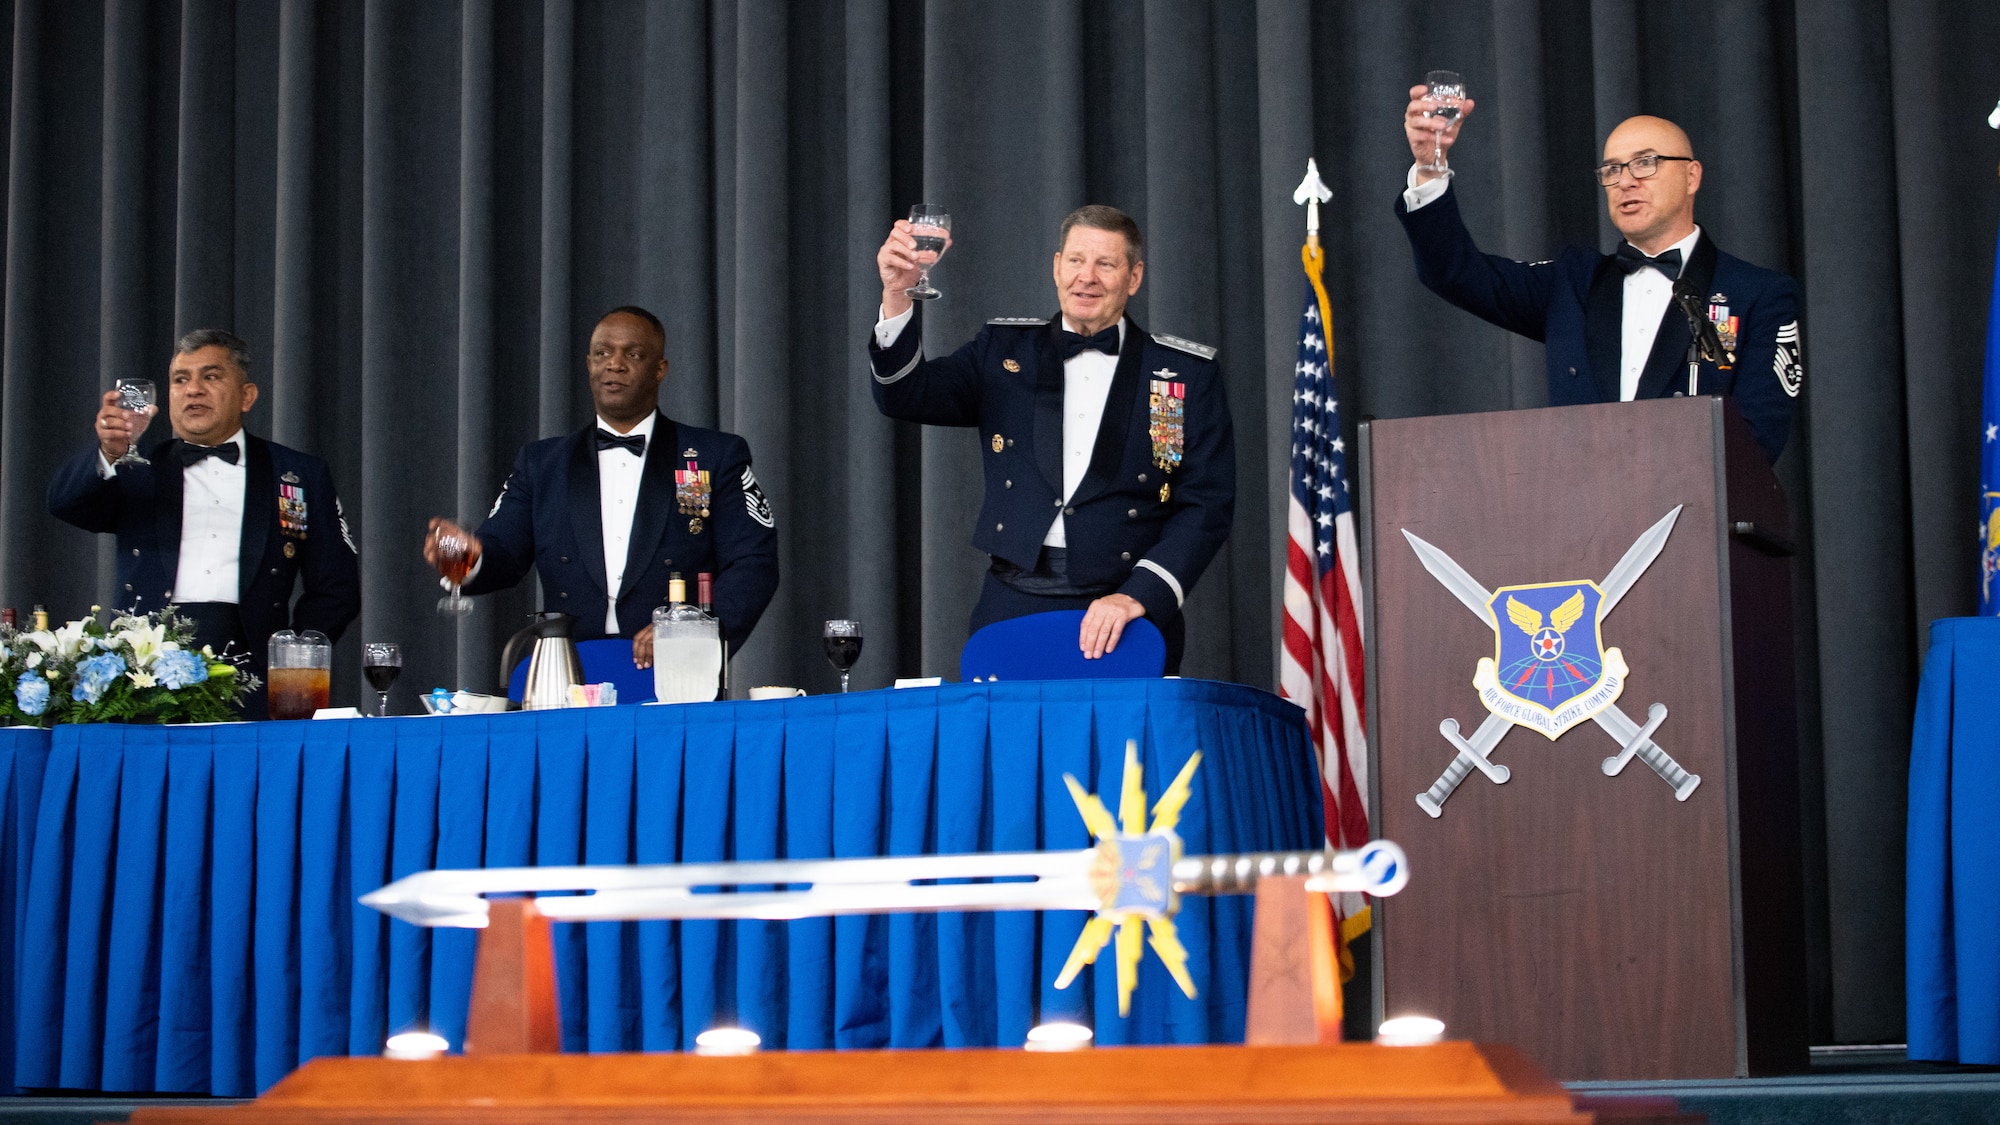 Retired Gen. Robin Rand, second from right, former Air Force Global Strike Command commander, and his former Command Chief Master Sgts. make a toast during an Order of the Sword ceremony at Barksdale Air Force Base, Louisiana, April 23, 2021. The Order of the Sword is a rare honor bestowed on a senior officer or civilian by the enlisted corps of a command. (U.S. Air Force photo by Airman 1st Class Jacob B. Wrightsman)